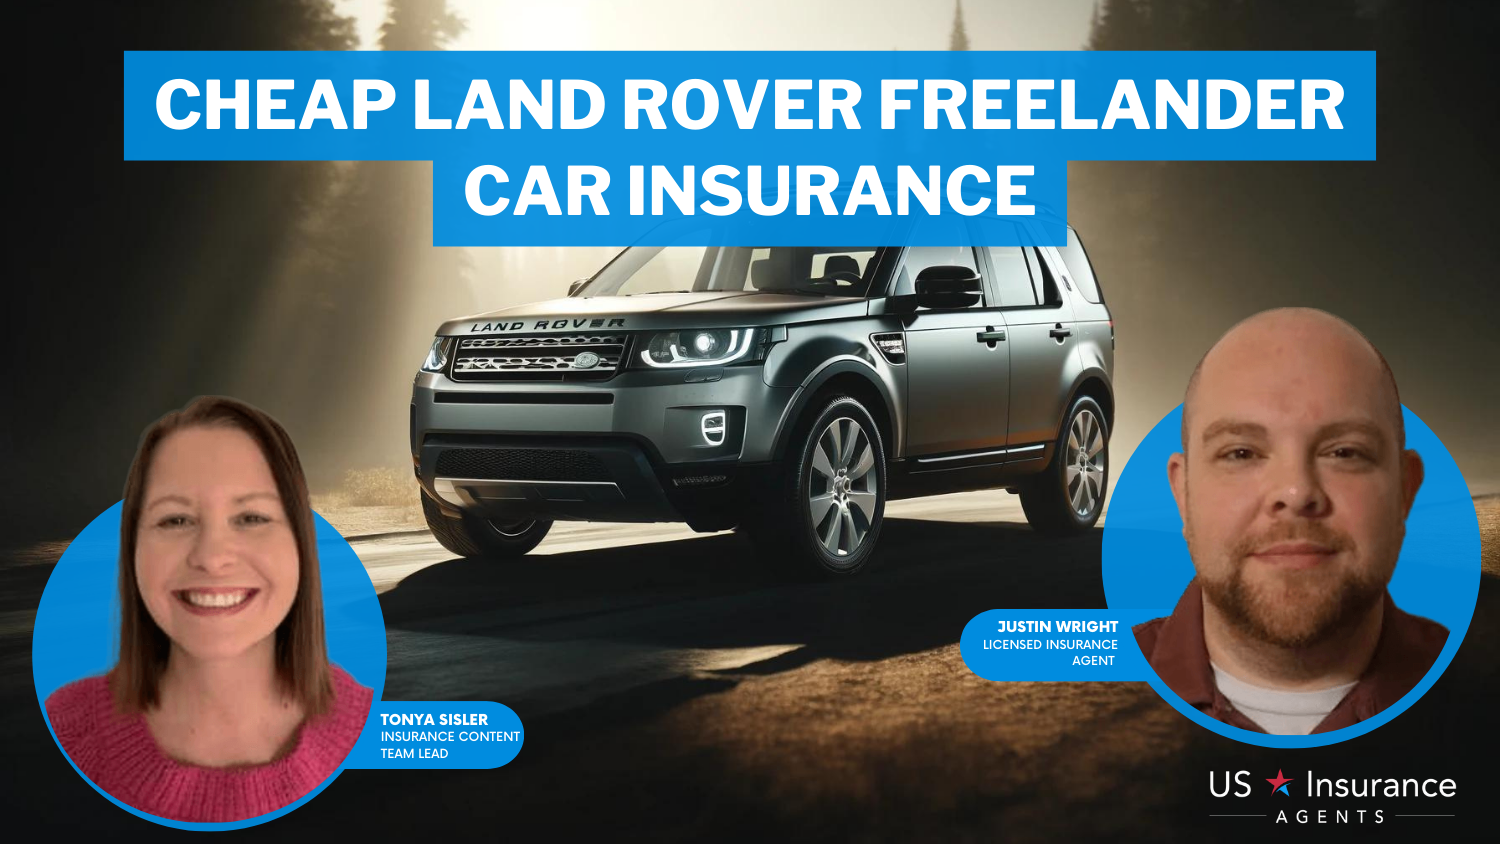 State Farm, USAA and Travelers: Cheap Land Rover Freelander Car Insurance